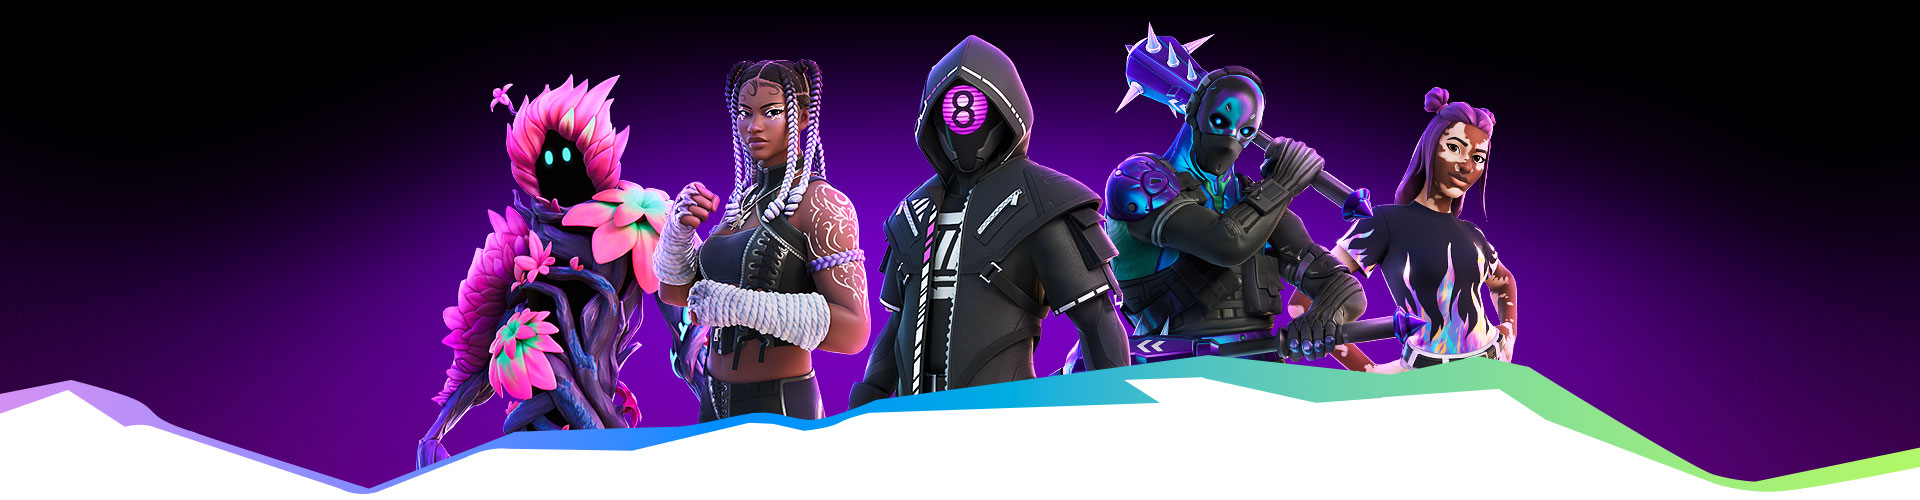 Five Fortnite characters pose together wearing purple-themed skins. 